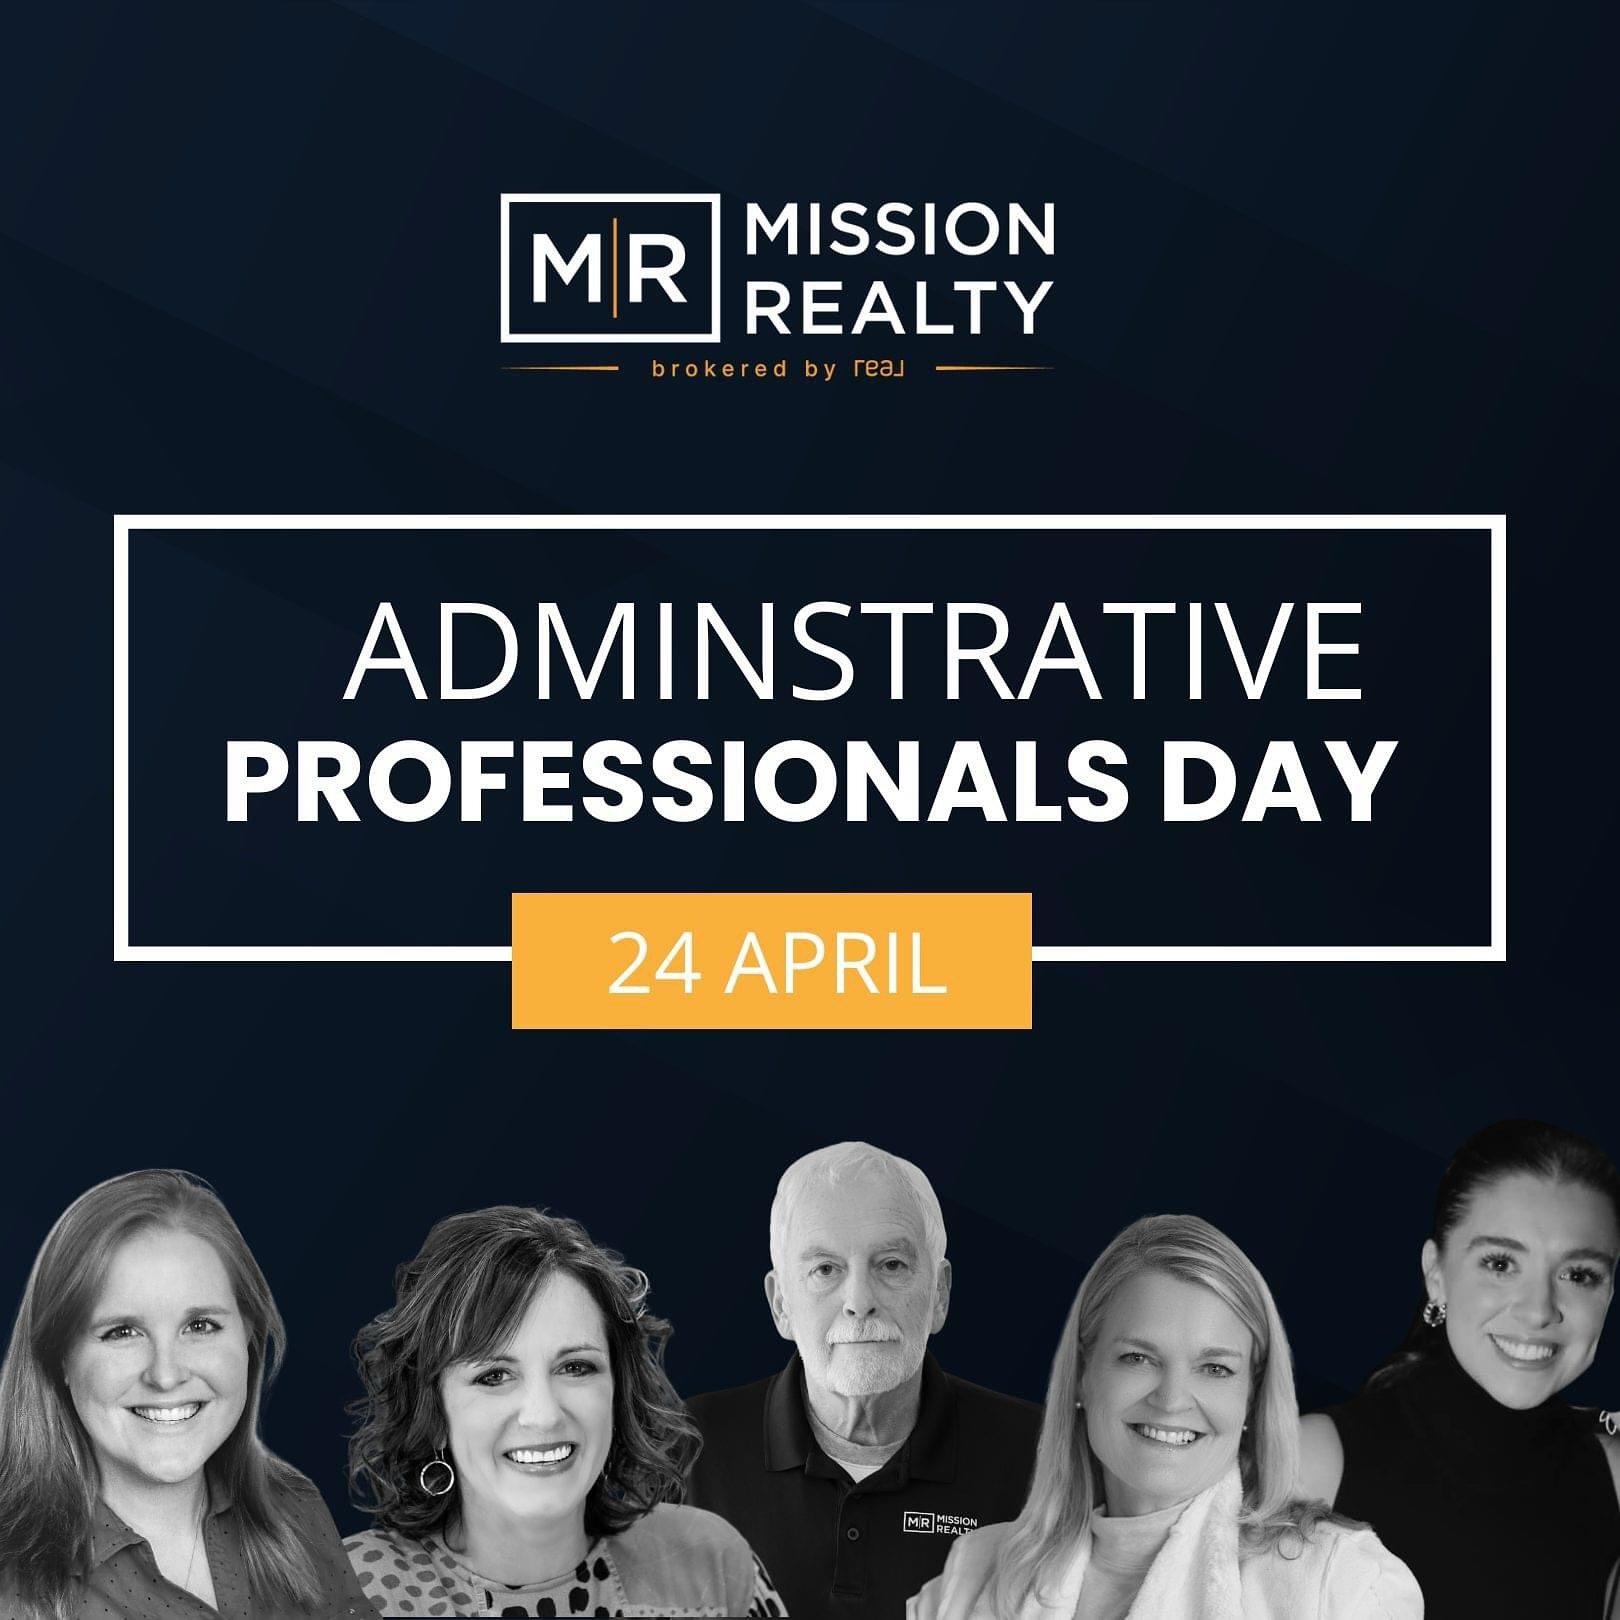 As we celebrate Administrative Professionals Day, we would like to take a moment to recognize the individuals at Mission Realty who make it happen, behind the scenes.... 

To our Sales Manager, Sarah Hutchinson: Thank you for your exceptional leaders